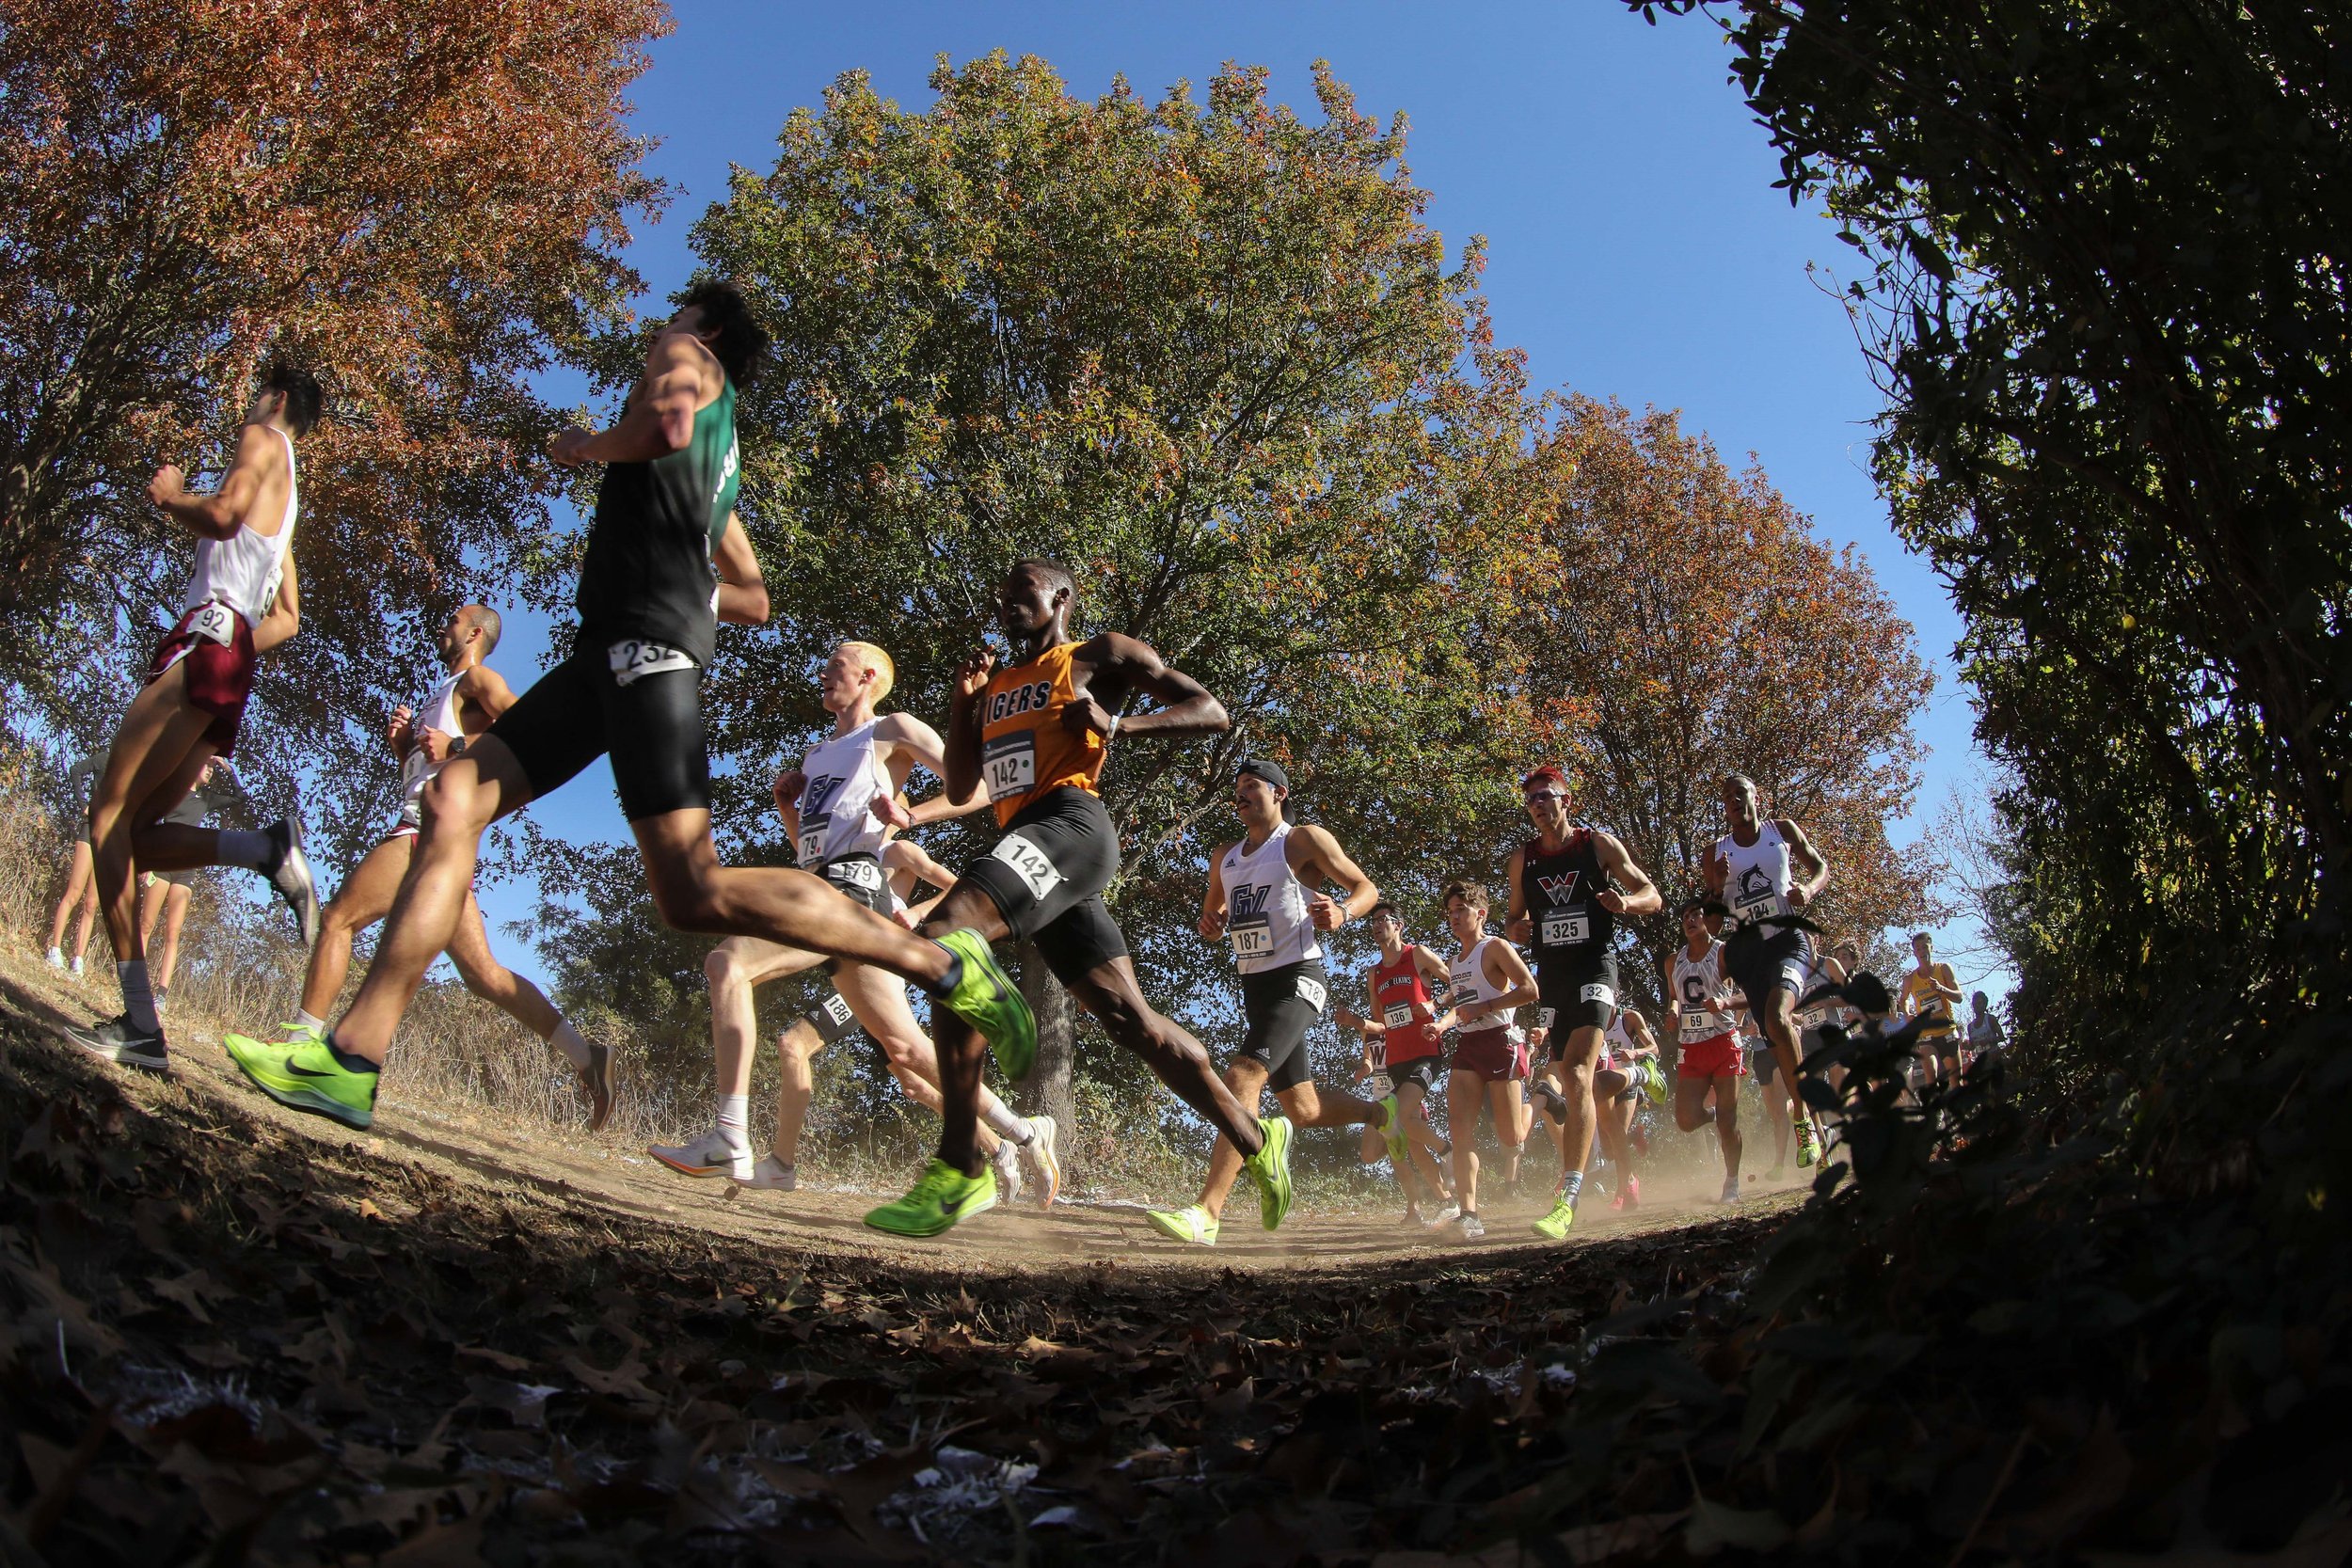  JOPLIN, MISSOURI - NOVEMBER 18: Athletes compete during the Division II Men's Cross Country Championship held at Tom Rutledge Cross Country Course on November 18, 2023 in Joplin, Missouri. (Photo by Tyler Schank/NCAA Photos via Getty Images) 